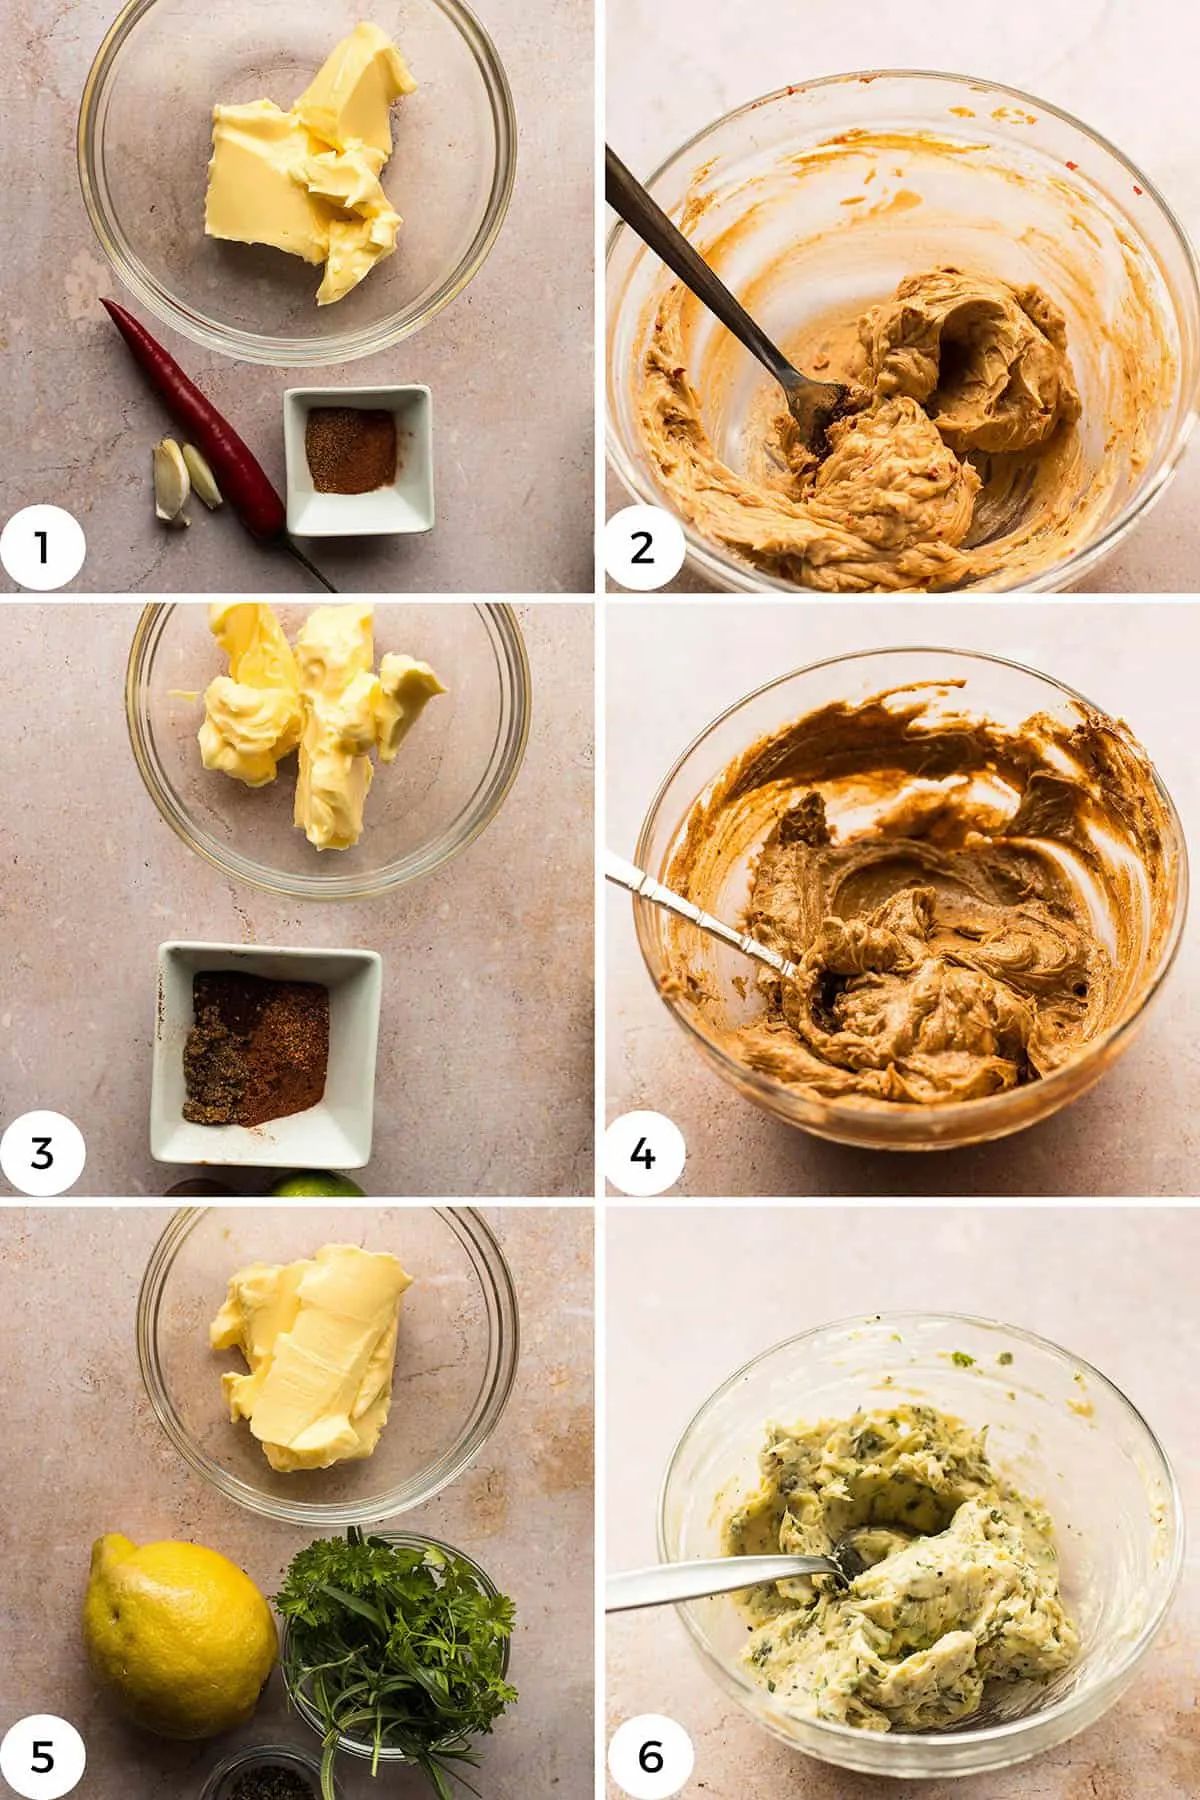 Steps to make the different compound butter recipes.